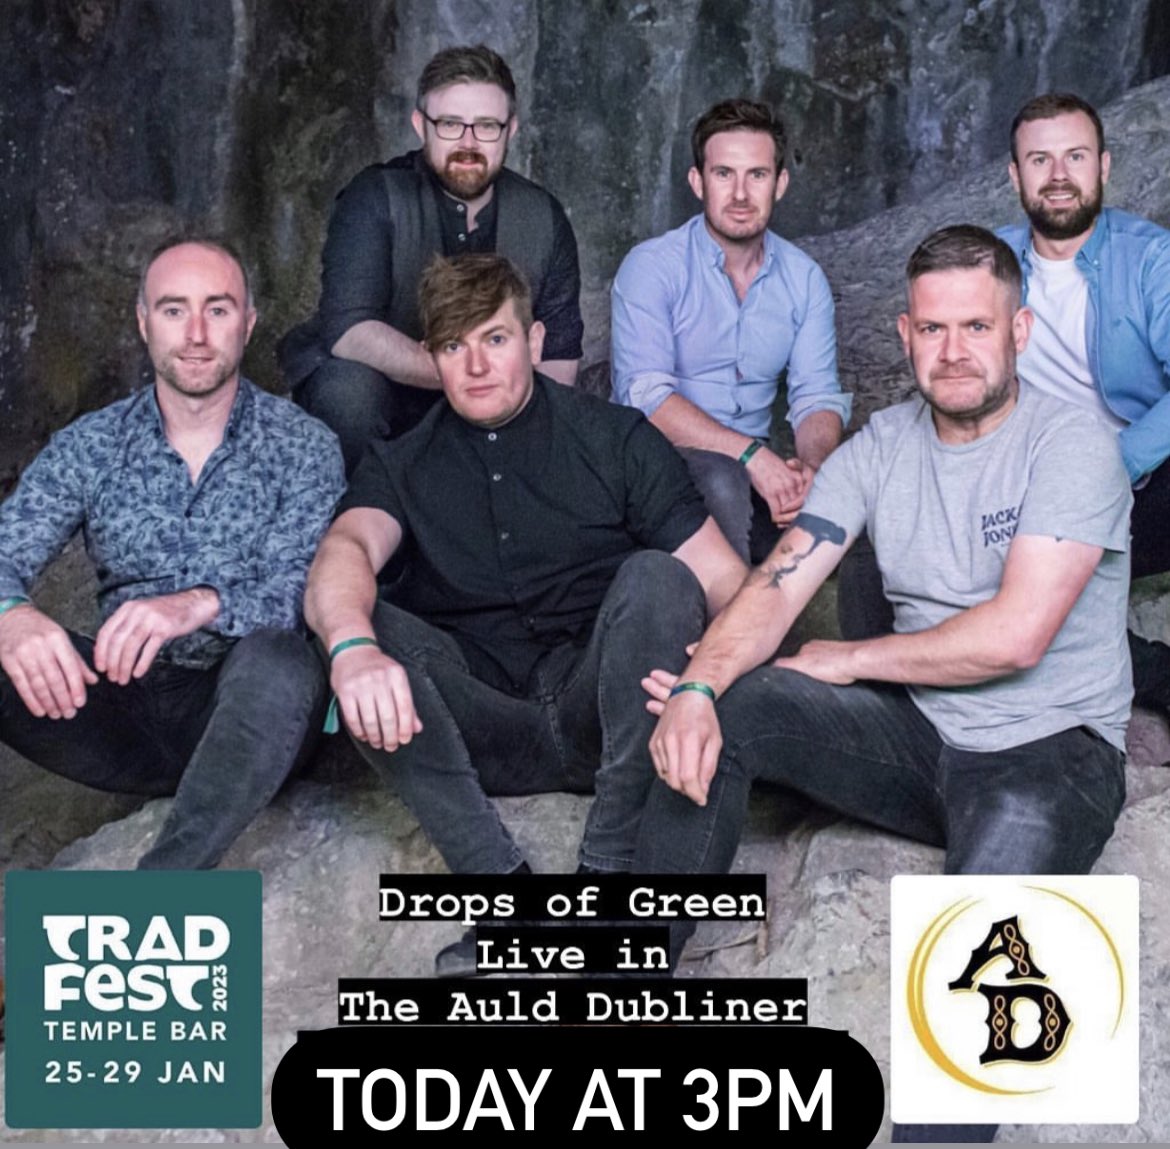 Our final @TempleBarTrad Smithwick’s Session kicks off at 3pm today with the iconic @DropsofGreen 🎶

Come and experience Irish Trad Music at its best ☘️🍻

#theaulddubliner #dublin #templebar #discovertemplebar #tradfesttemplebar2023 #livemusic #dublinpubs #winterindublin